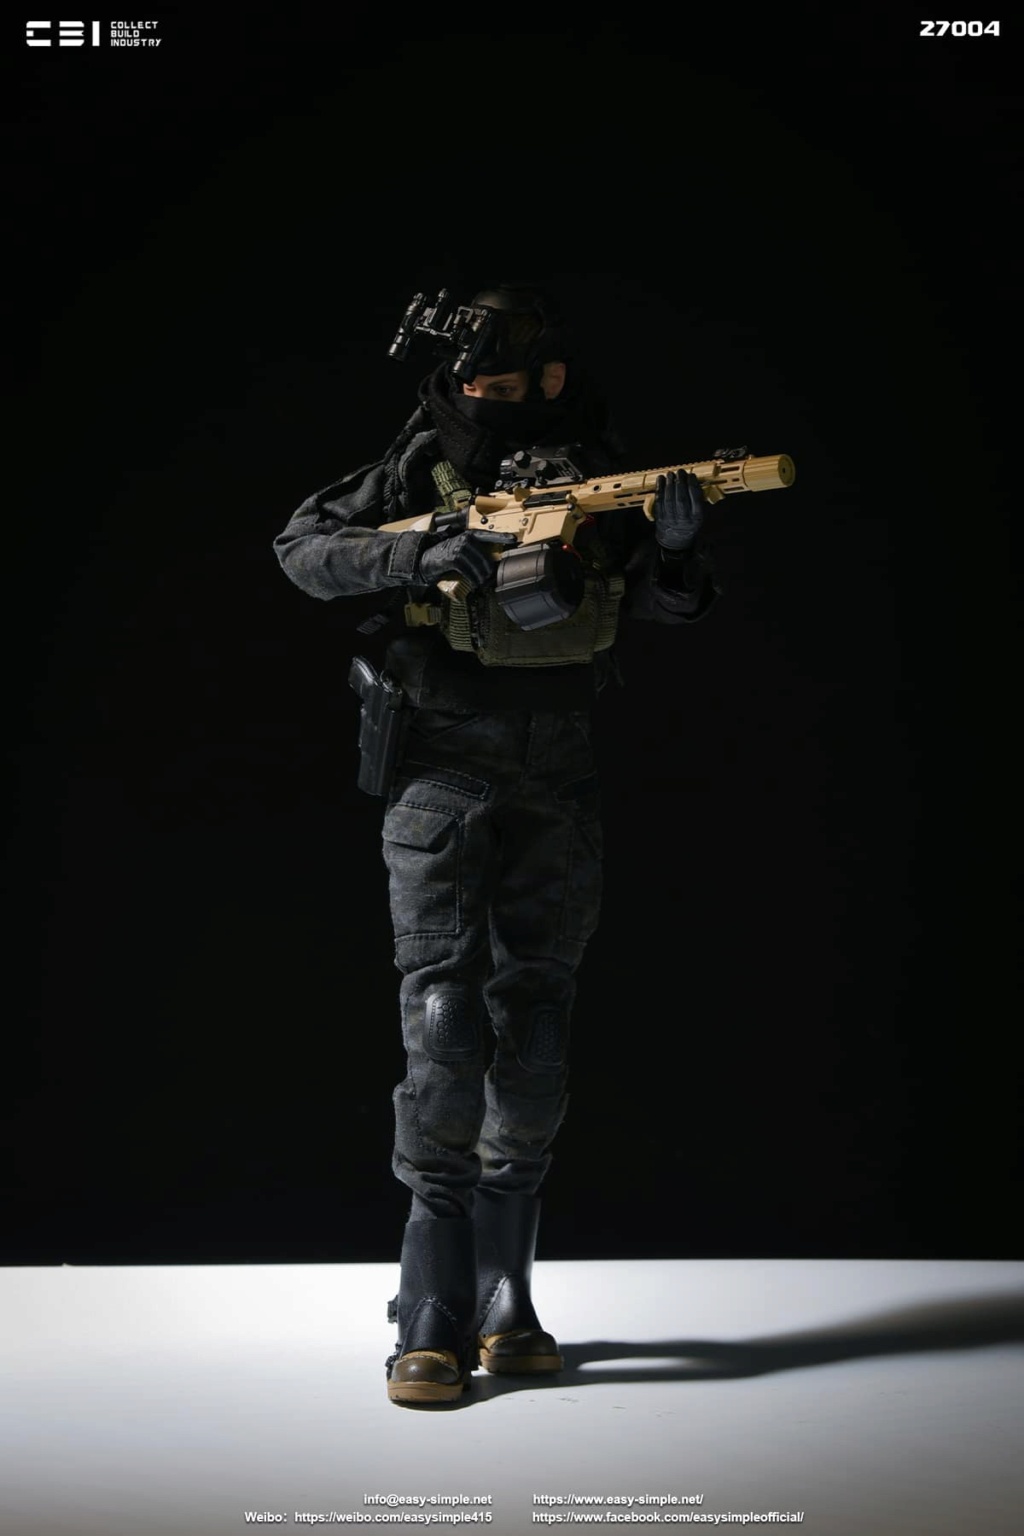 NEW PRODUCT: CBI & Easy&Simple: 27004 1/6 ERICA STORM - TASK FORCE 58 CPO action figure 3770